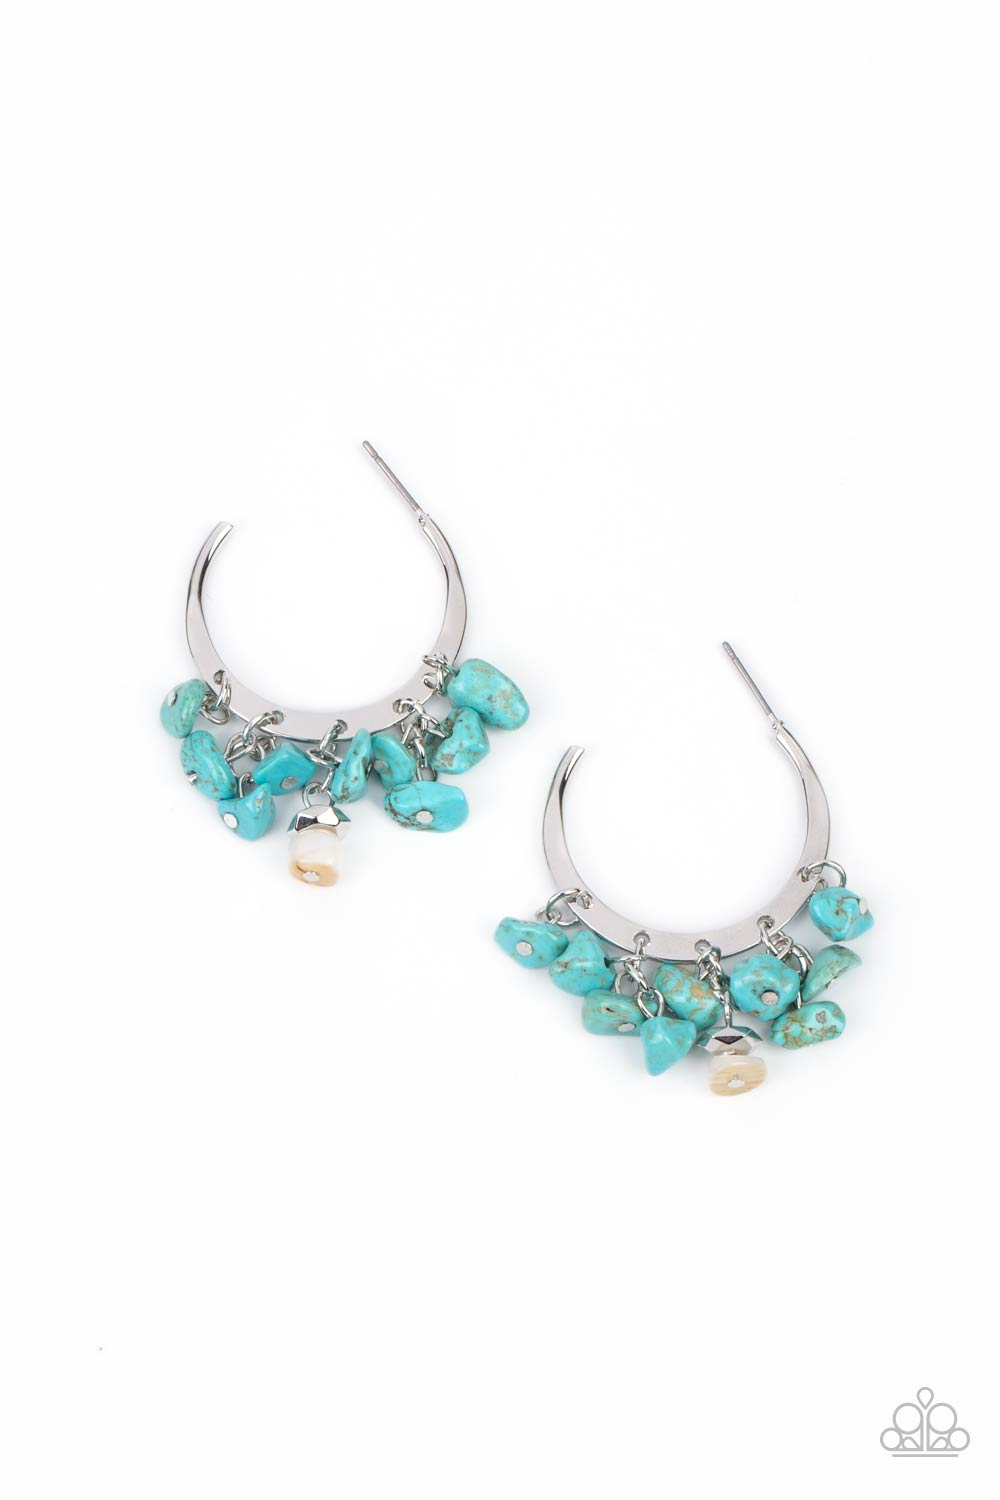 Gorgeously Grounding - Blue Hoop Earrings clusters of turquoise pebbles swing from the bottom of a dainty silver hoop, creating an earthy fringe. A faceted silver and white stone bead swings from the center, adding an ethereal edge. Earring attaches to a standard post fitting. Hoop measures approximately 1 1/4" in diameter.  Sold as one pair of hoop earrings.  Paparazzi Jewelry is lead and nickel free so it's perfect for sensitive skin too!